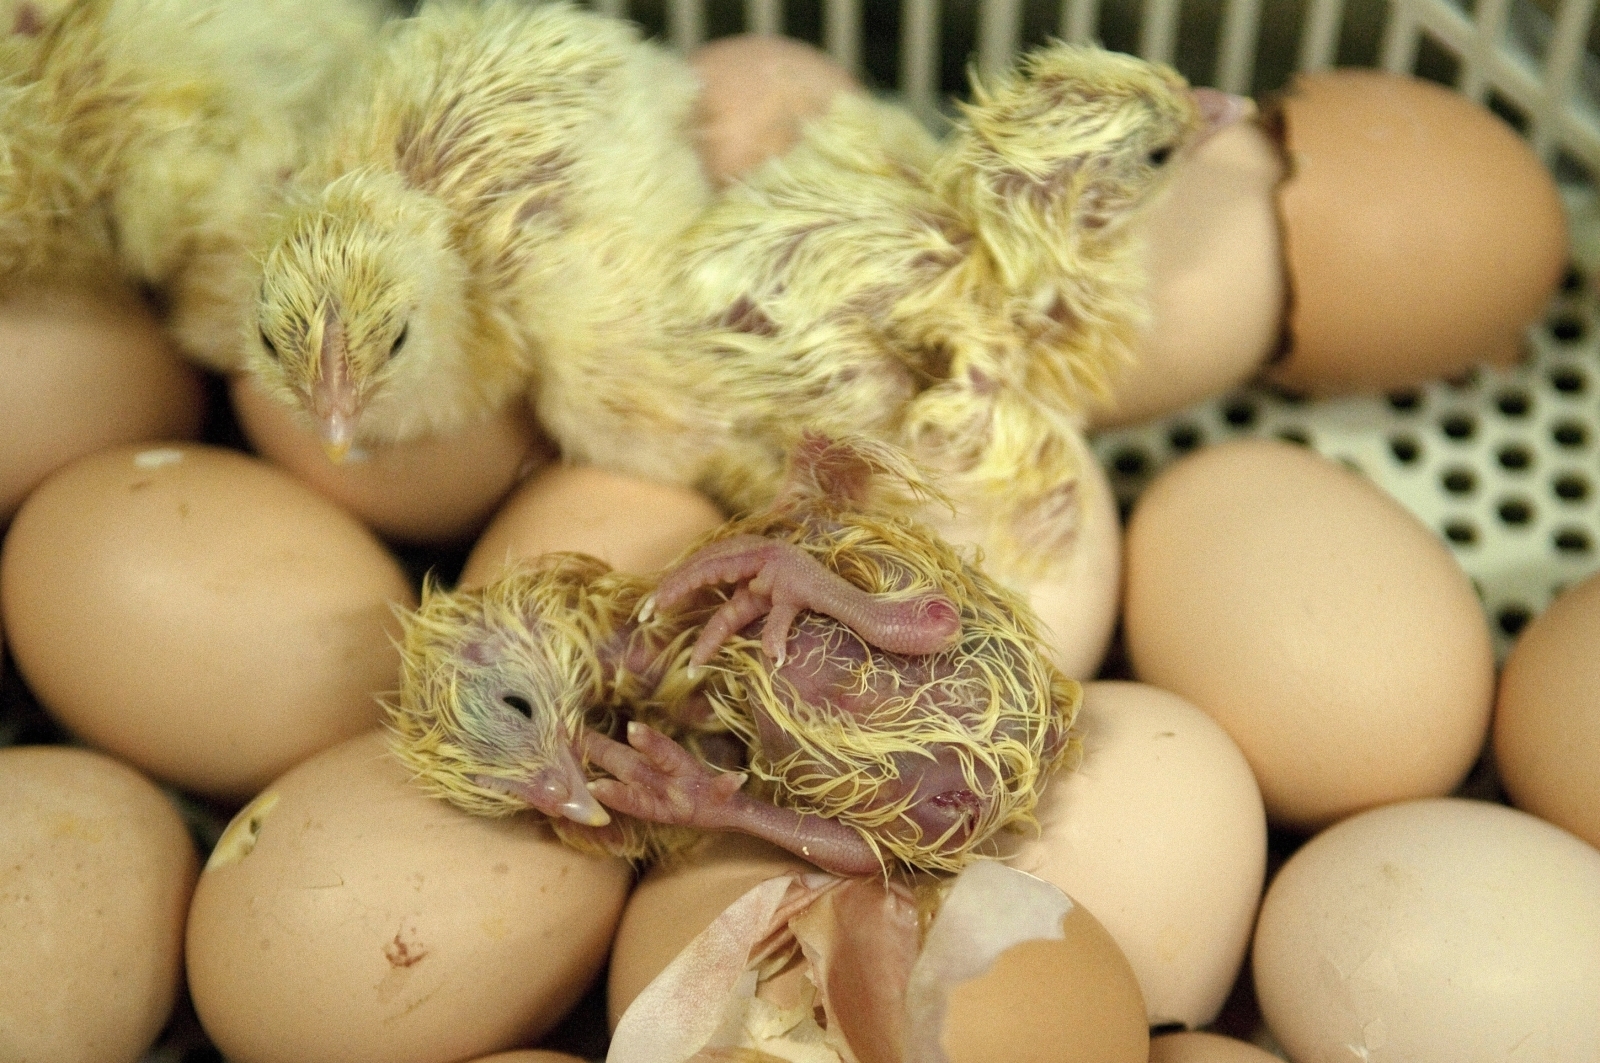 Us Egg Farmers To Stop Grinding Male Chicks Alive2020 within Chick To By In 2020